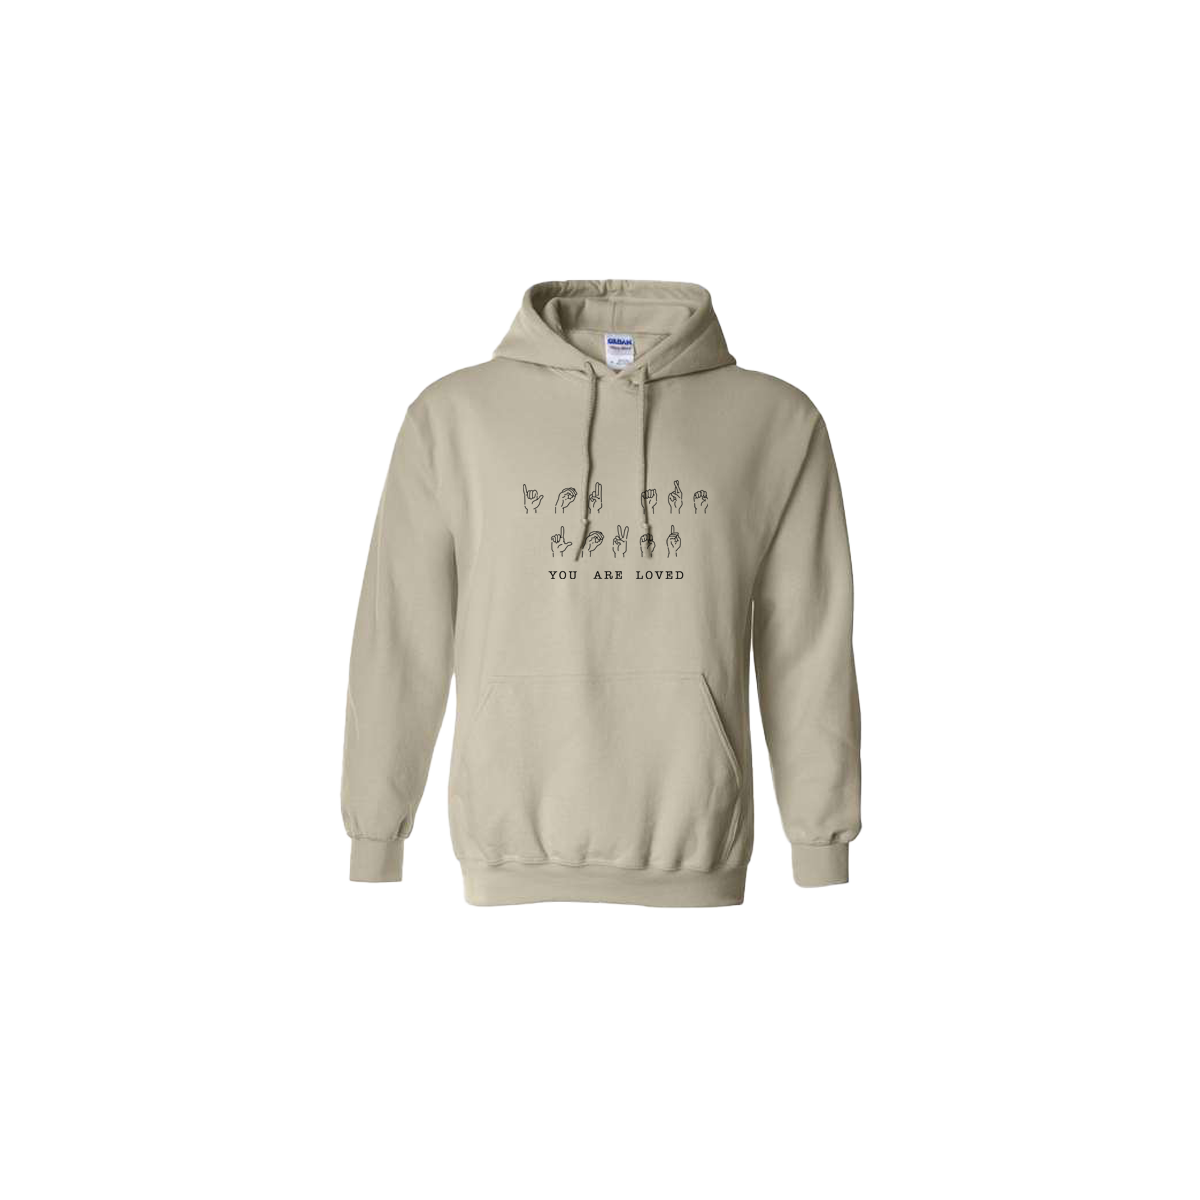 You Are Loved Sign Language Embroidered Beige Hoodie - Mental Health Awareness Clothing